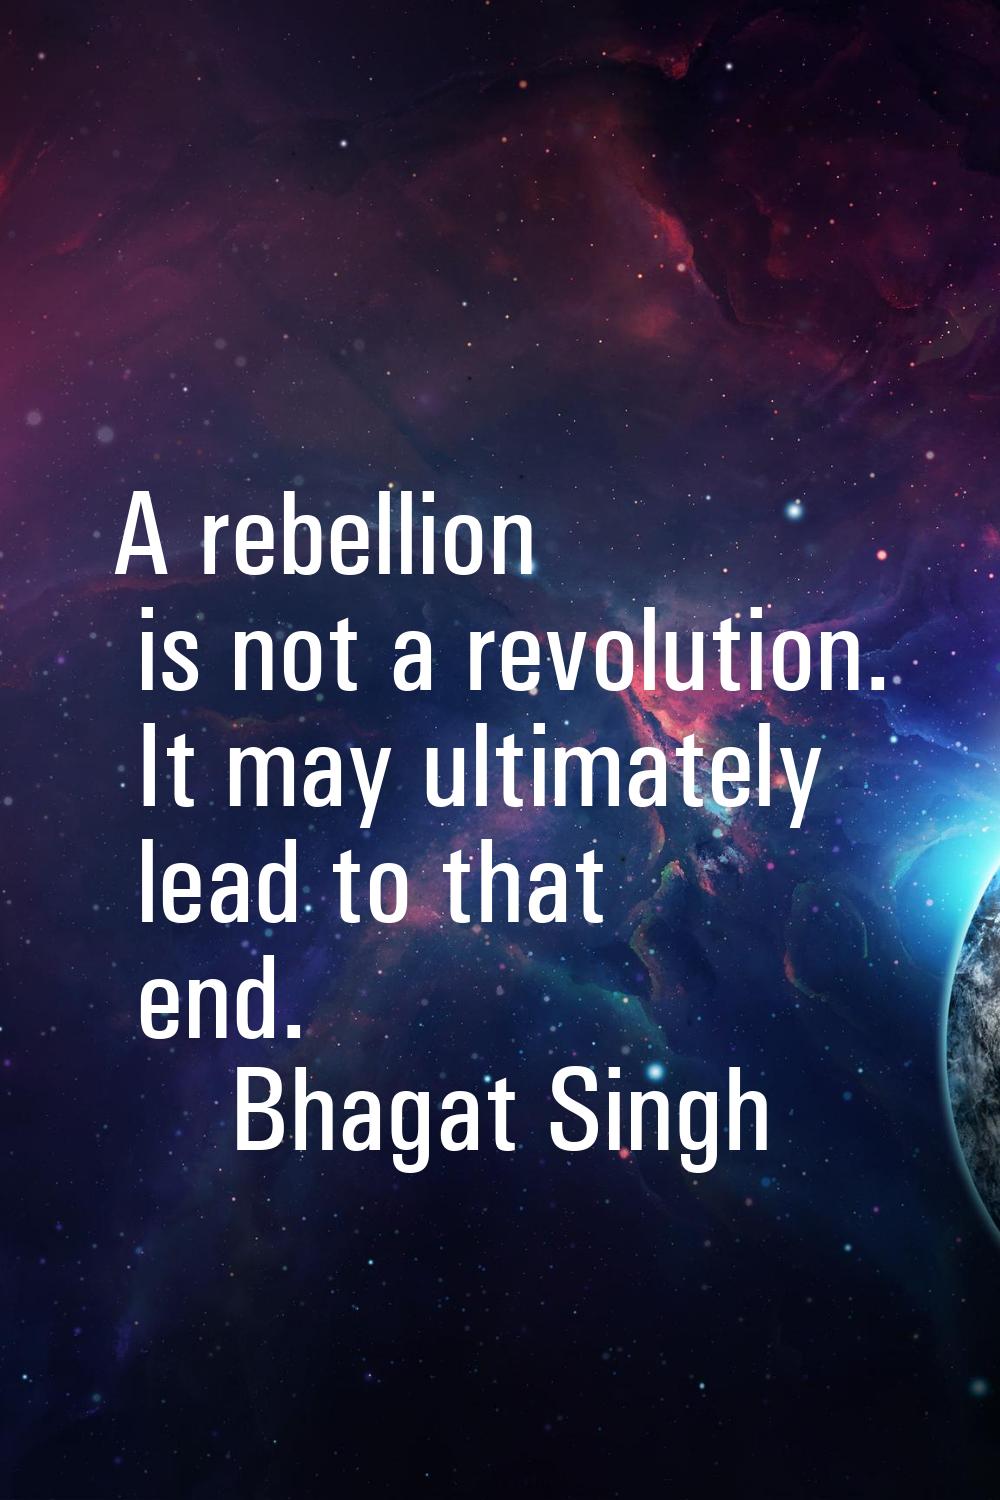 A rebellion is not a revolution. It may ultimately lead to that end.